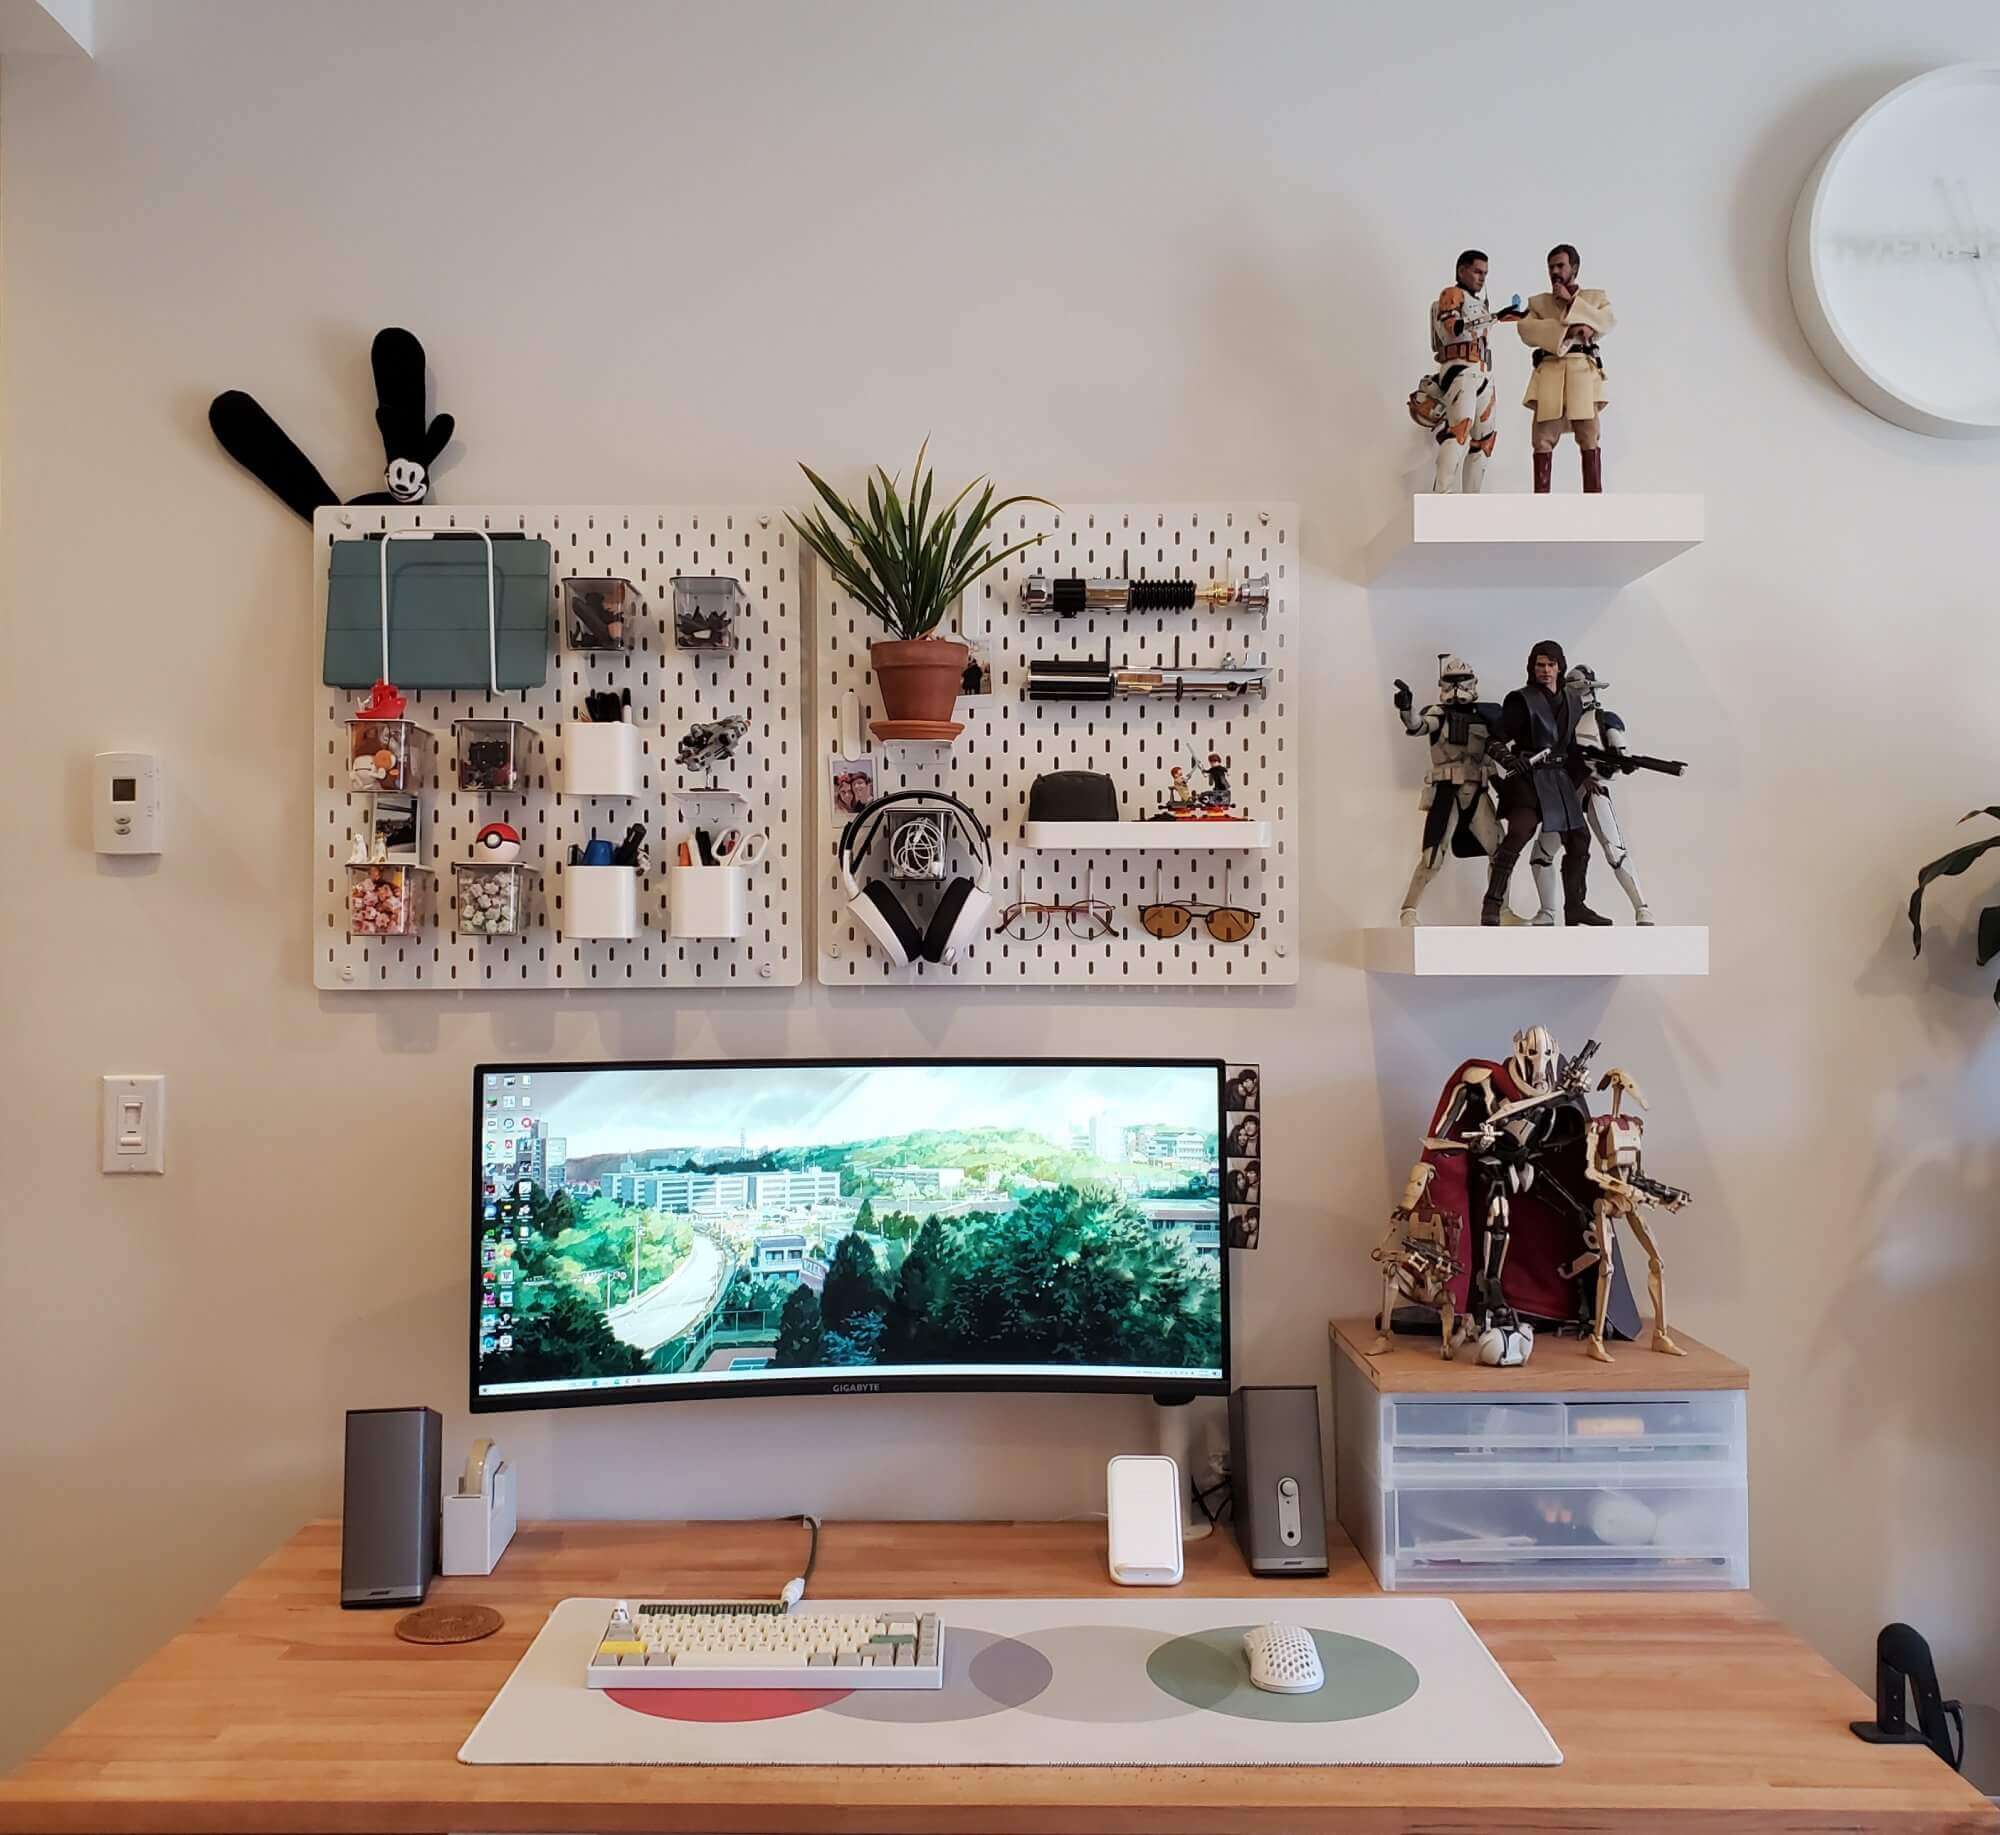 A well-organised desk with an ultrawide monitor, flanked by pegboards and decorative shelves displaying collectible figures, plants, and miscellaneous items, in a room with a minimalist aesthetic